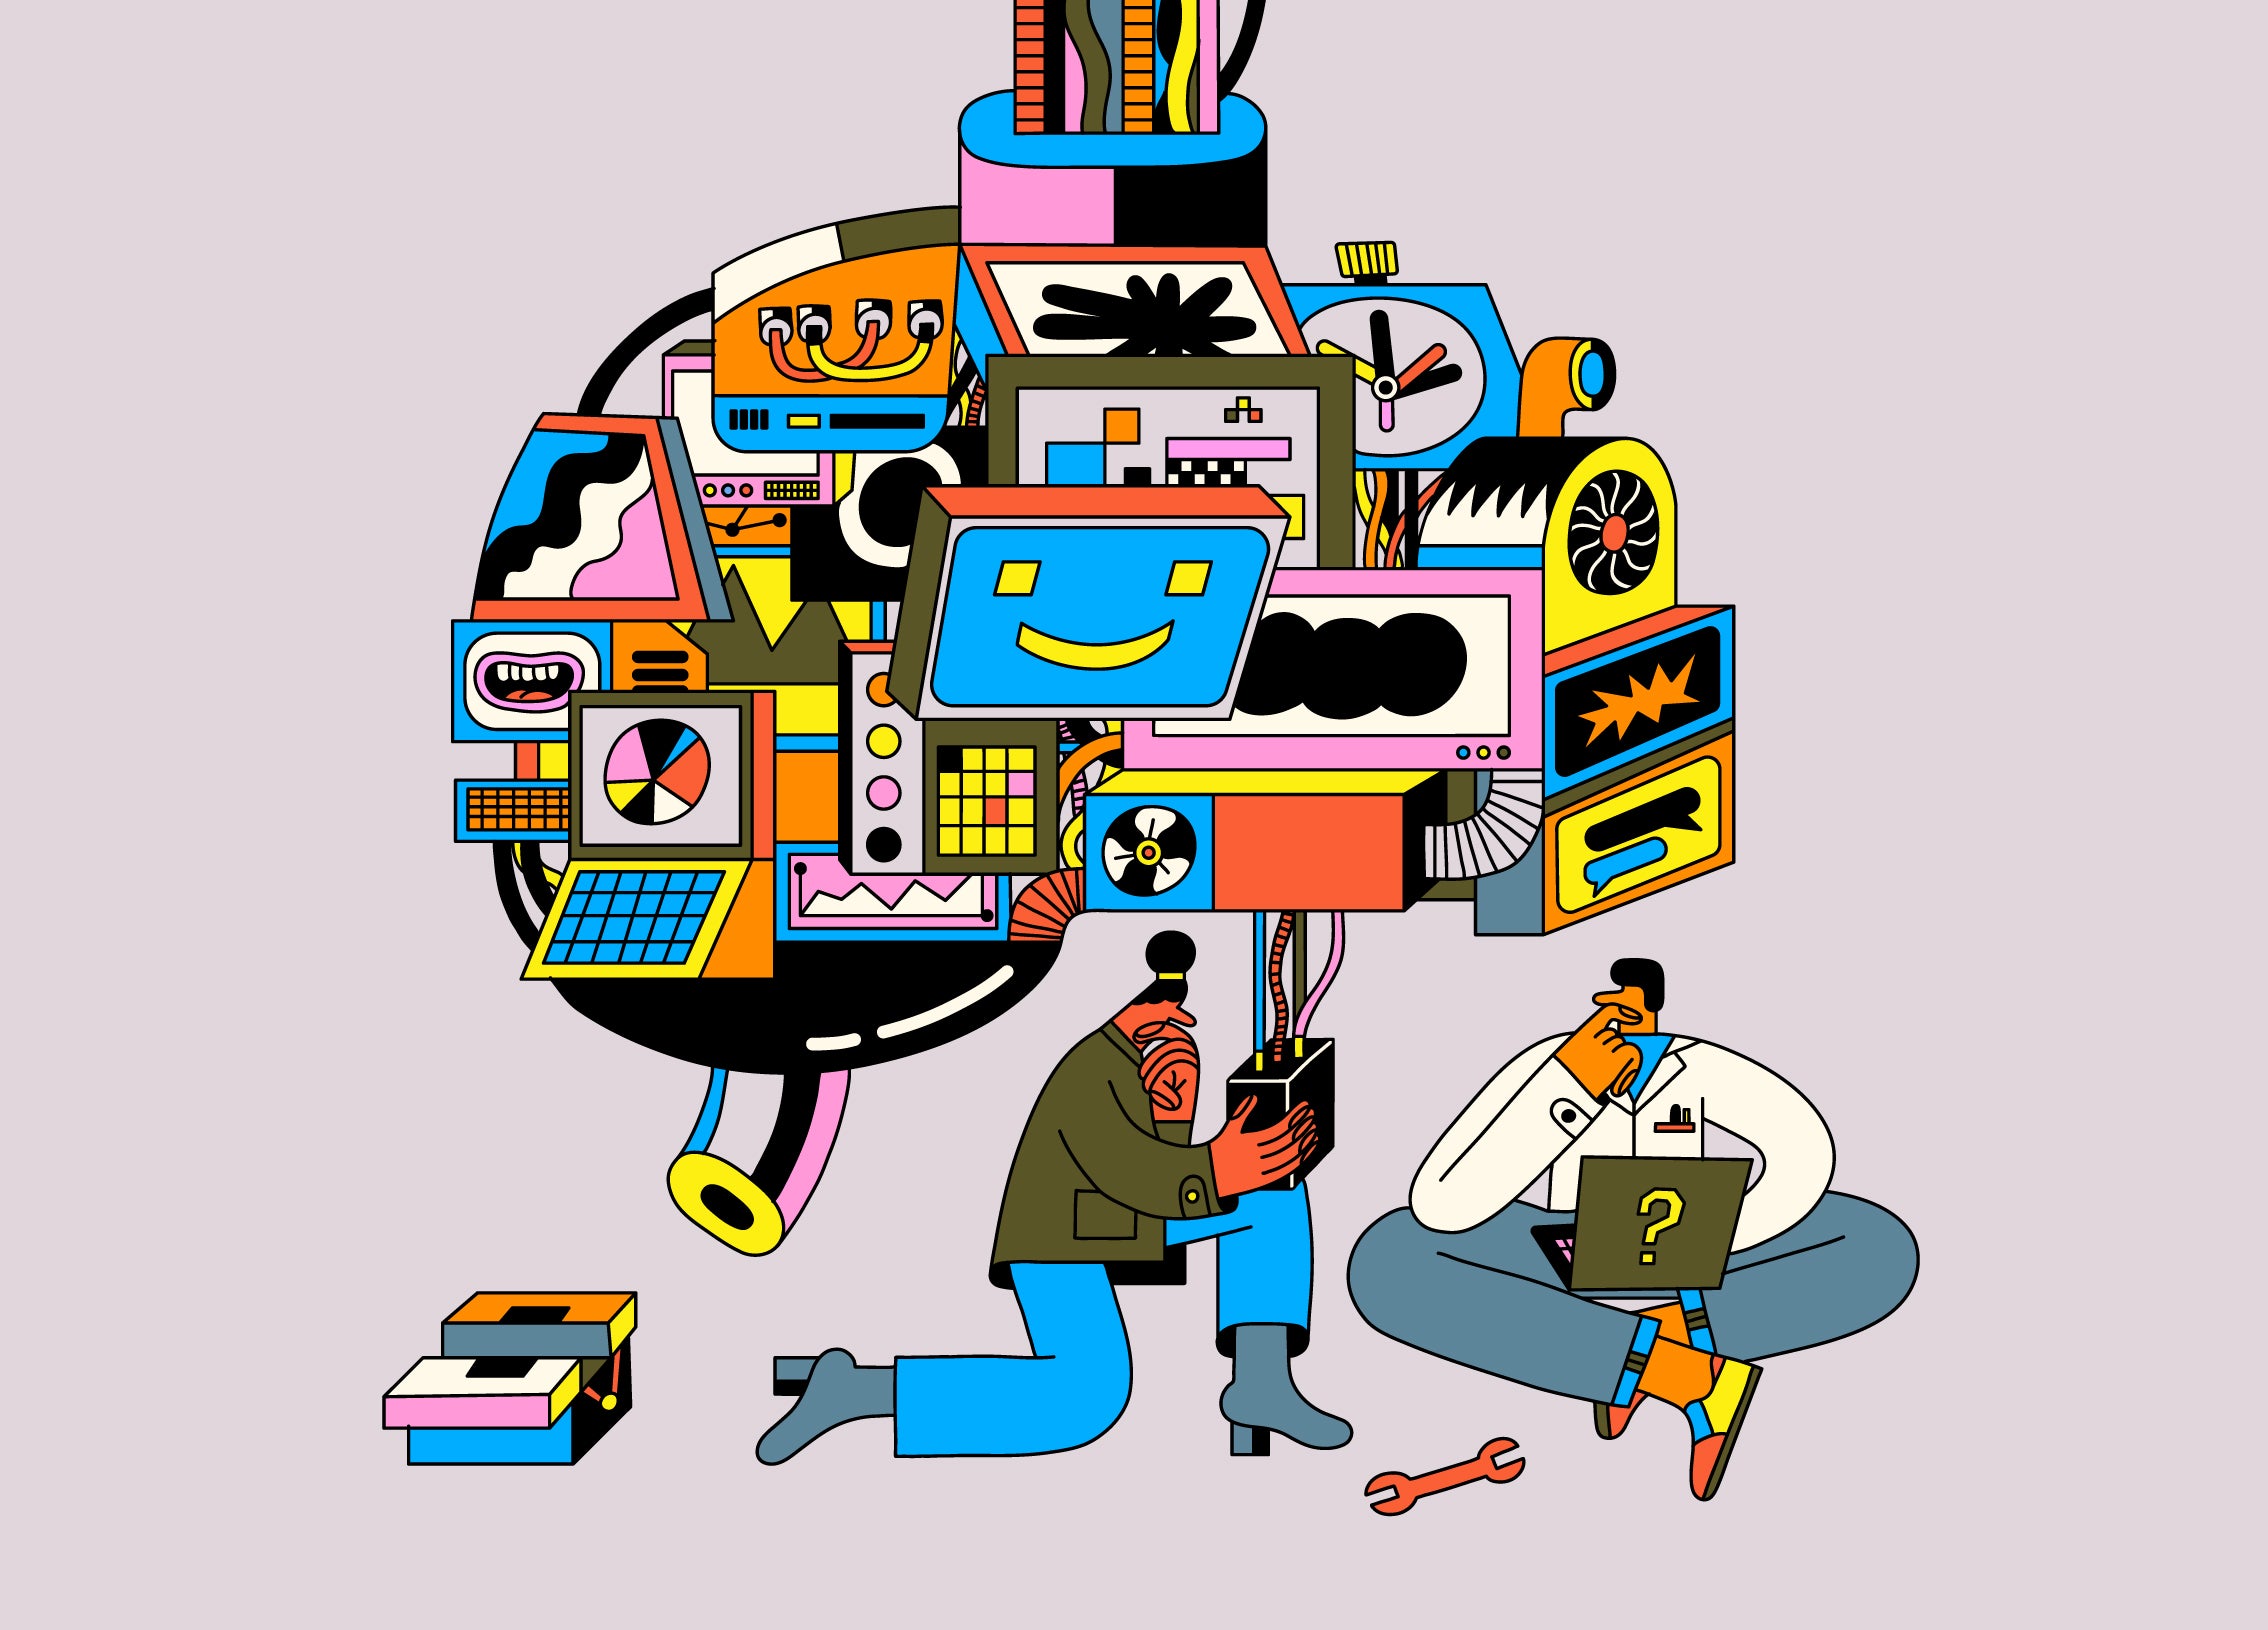 Cartoon of a large brain-shaped machine made of many computer parts being examined by two puzzled researchers